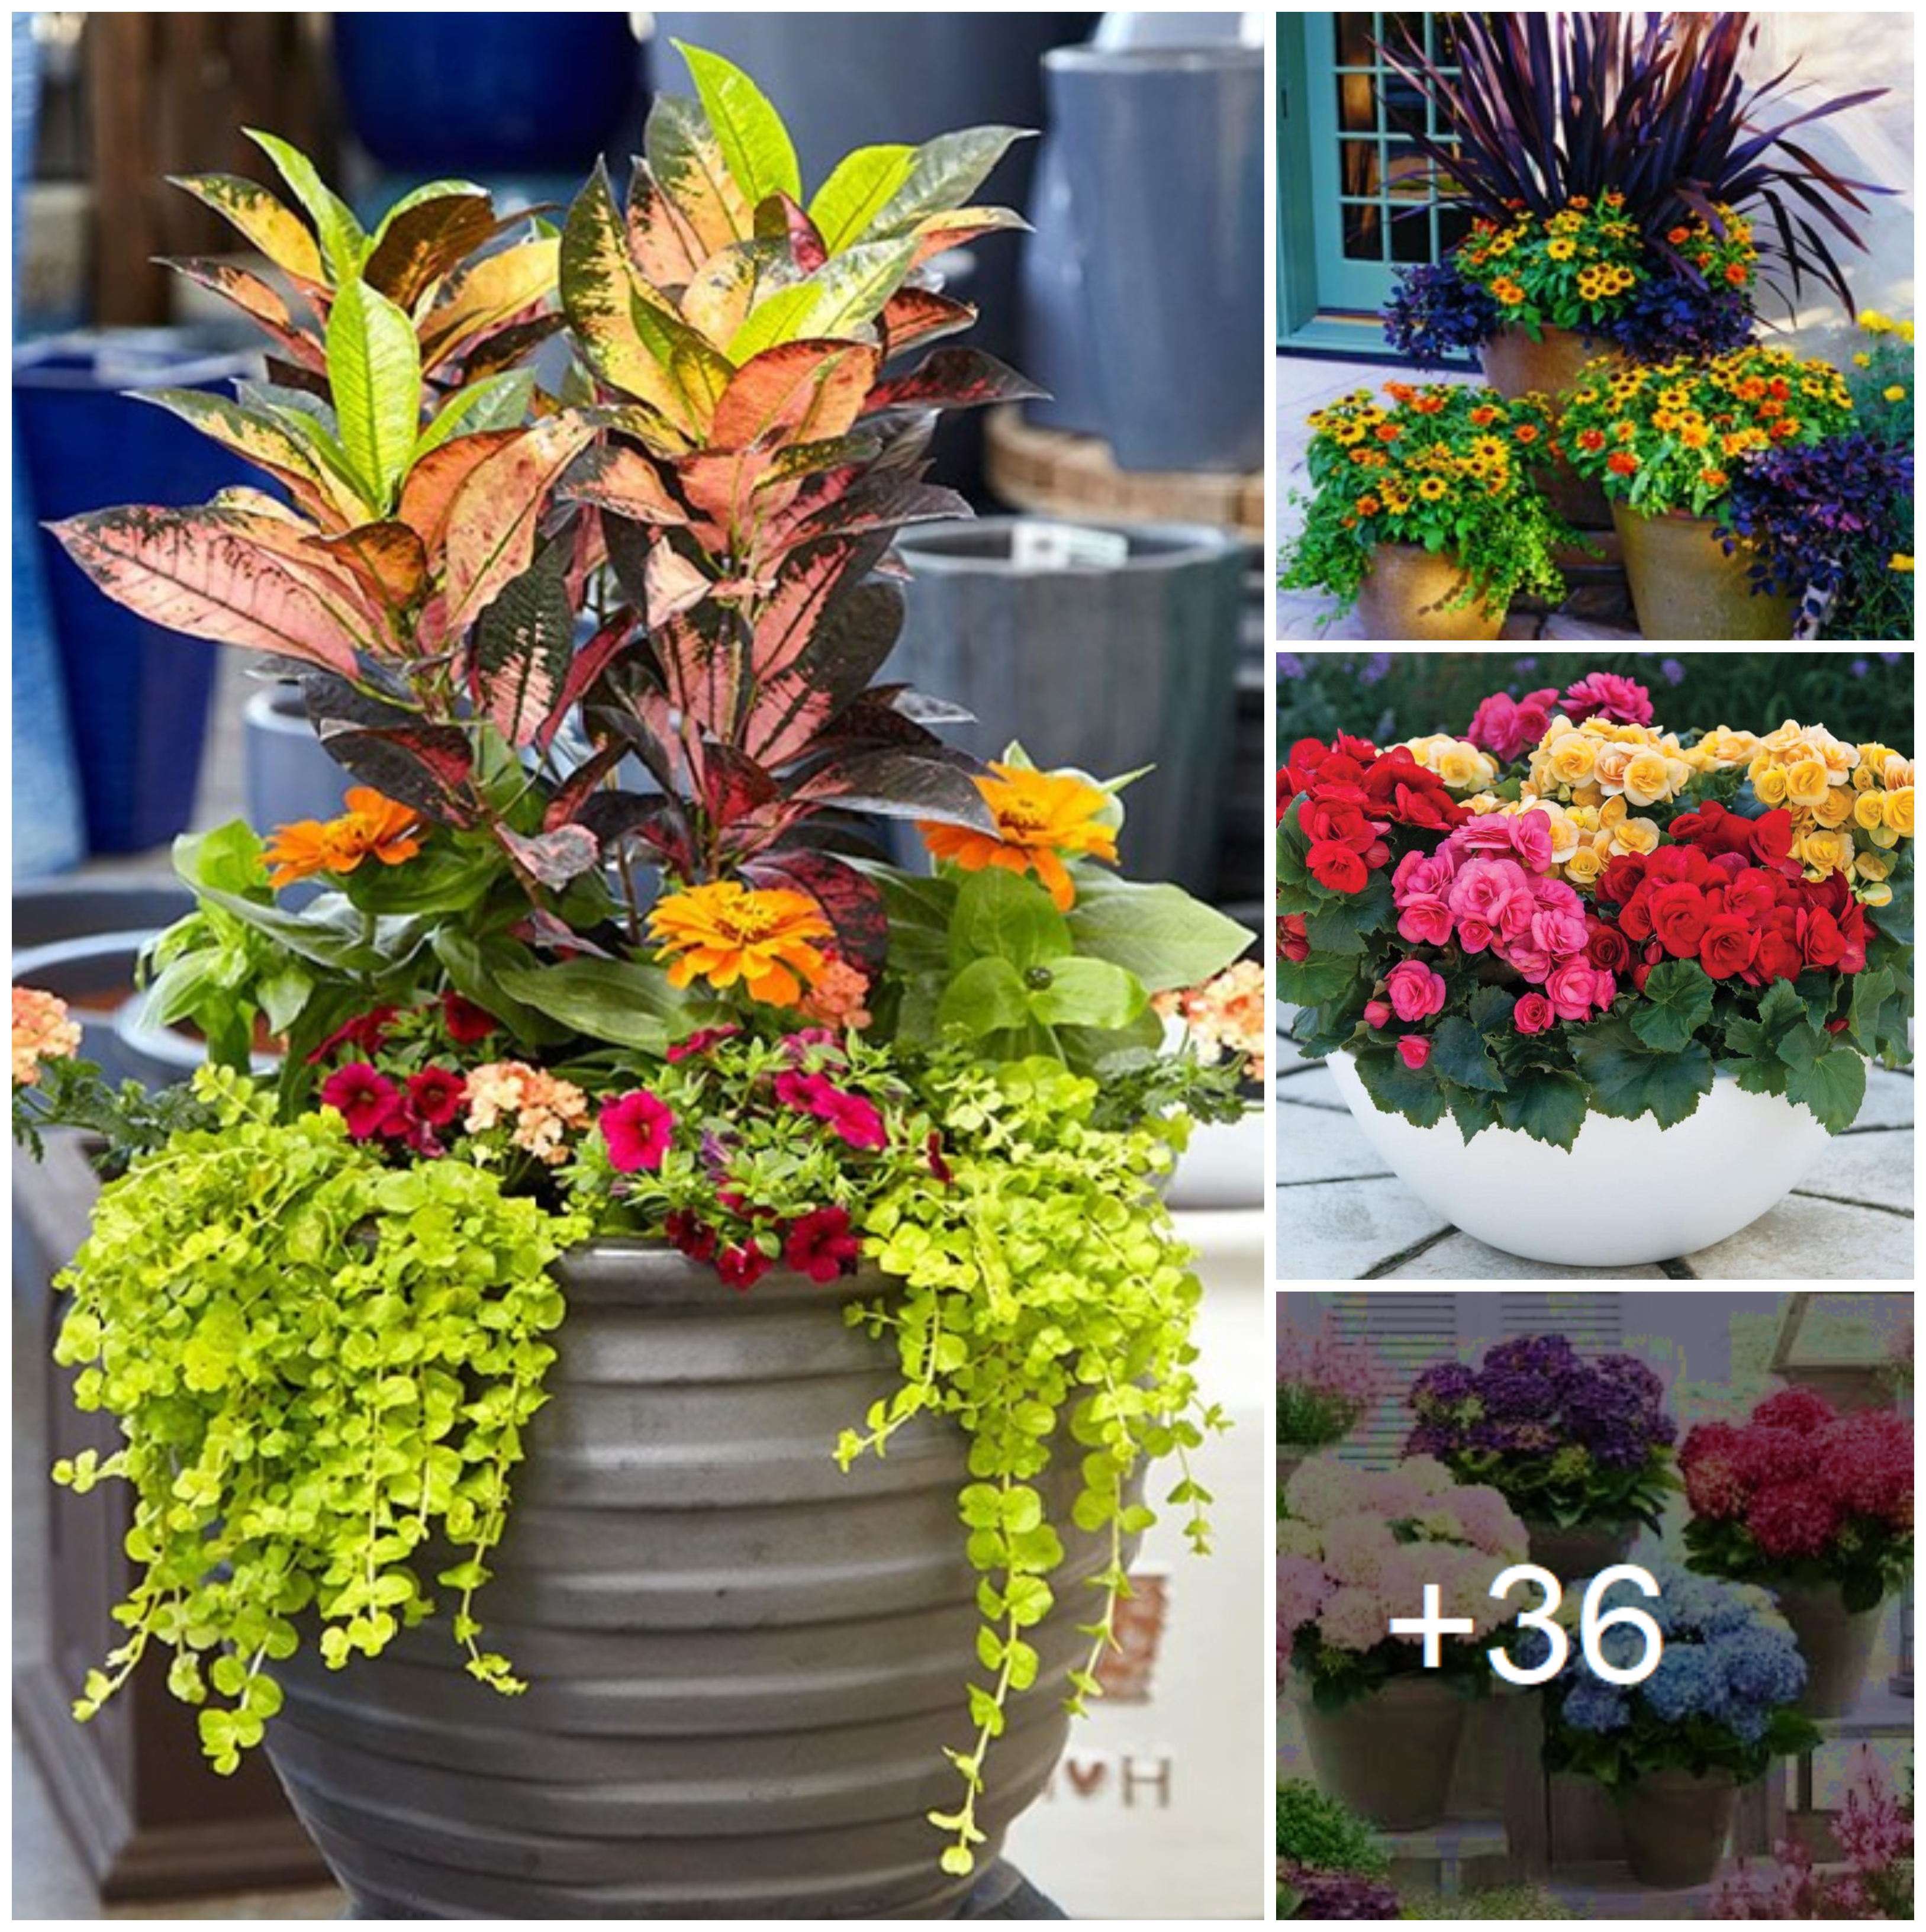 Add beauty to your garden with charming pots